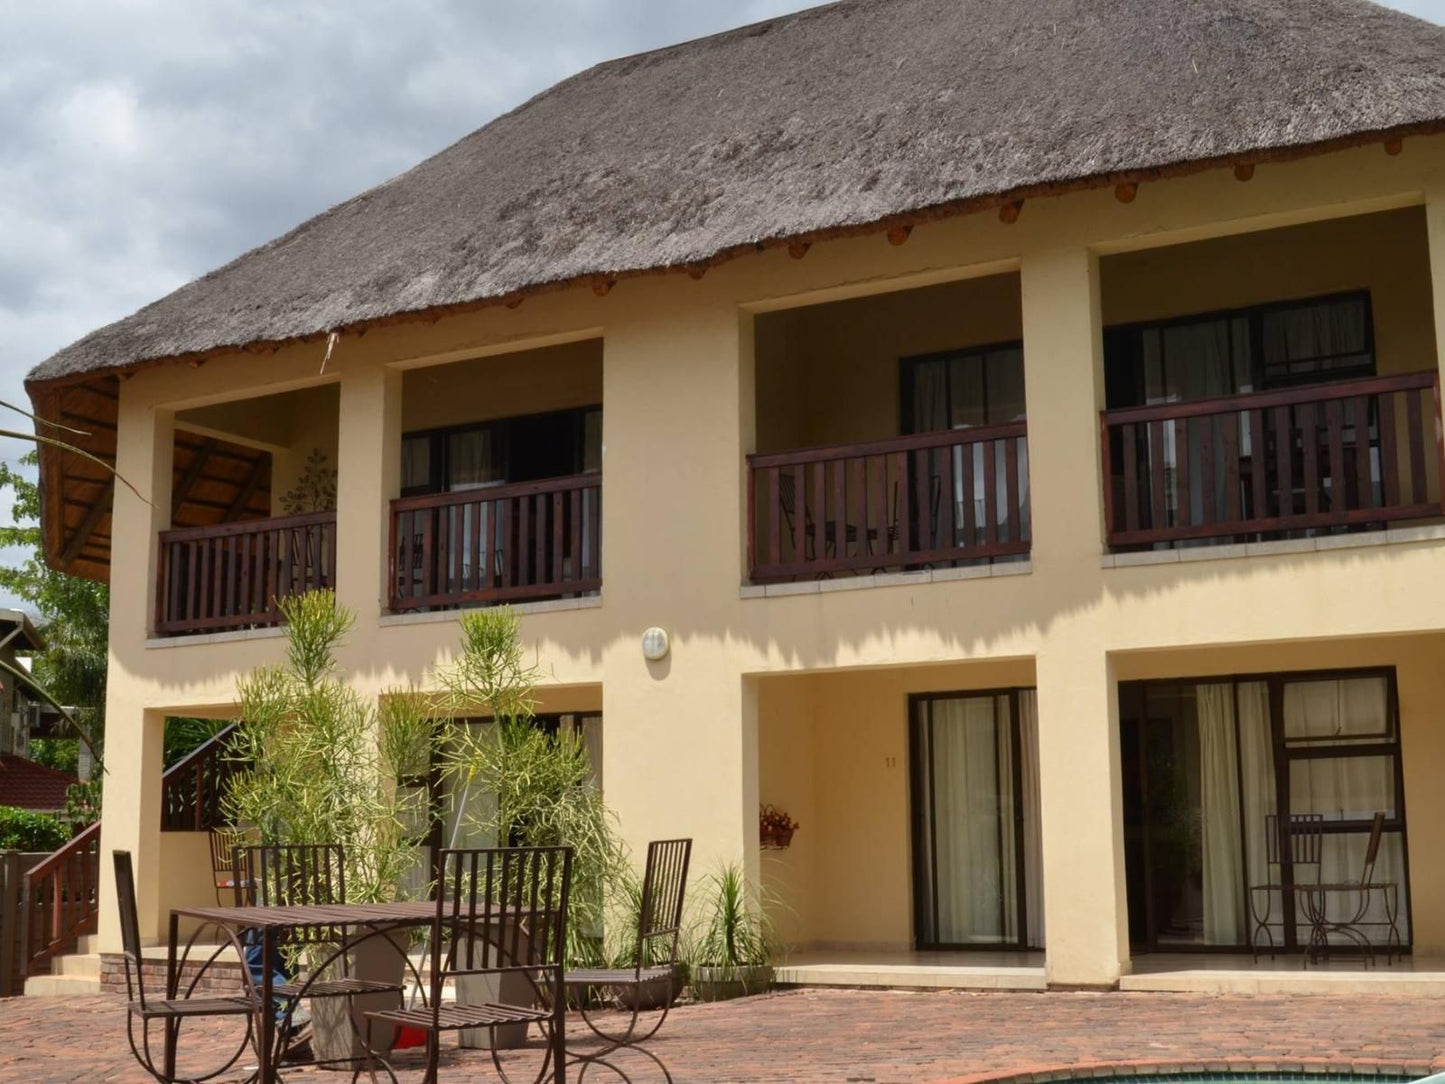 Acasia Guest Lodge Komatipoort Mpumalanga South Africa House, Building, Architecture